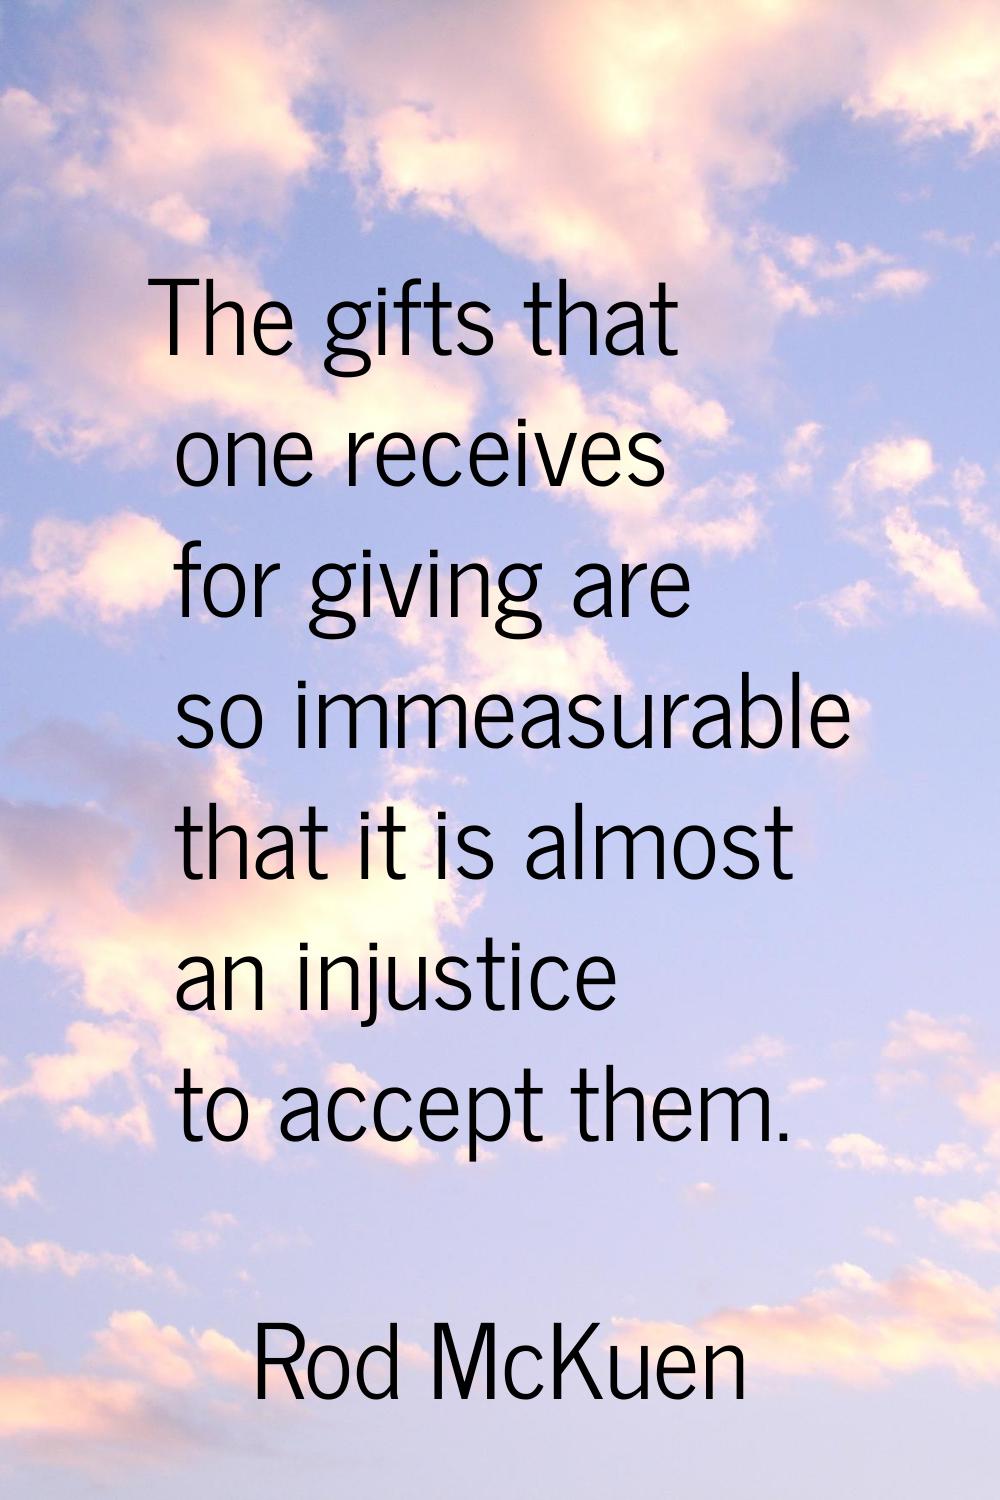 The gifts that one receives for giving are so immeasurable that it is almost an injustice to accept